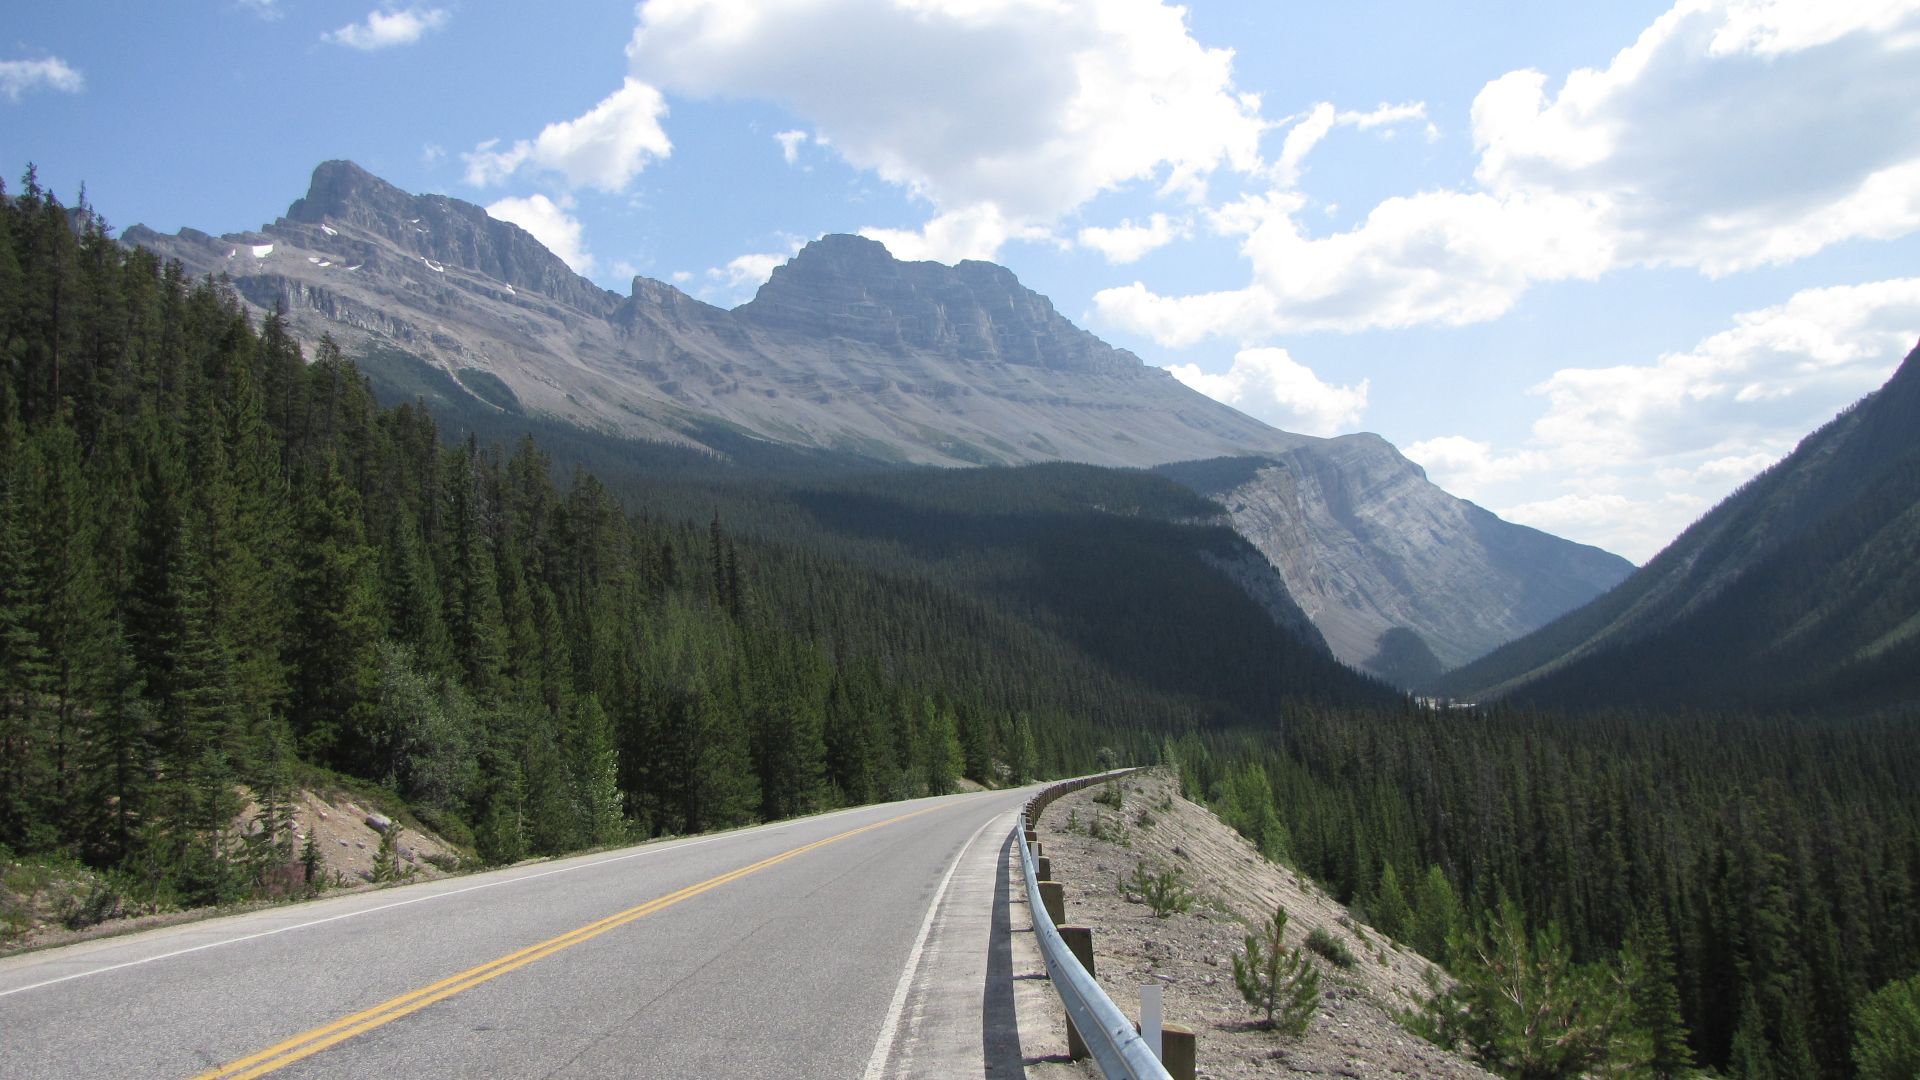 The Icefields Parkway, Alberta, Canada - they built a road through this! Part of me is glad, because I could ride it, & part of me wishes they`d left it pristine. Taken during "Part 4" of my 7-month solo ride in 2009 from the Arctic Ocean coast to Mexico, including following the length of the Rocky Mountains